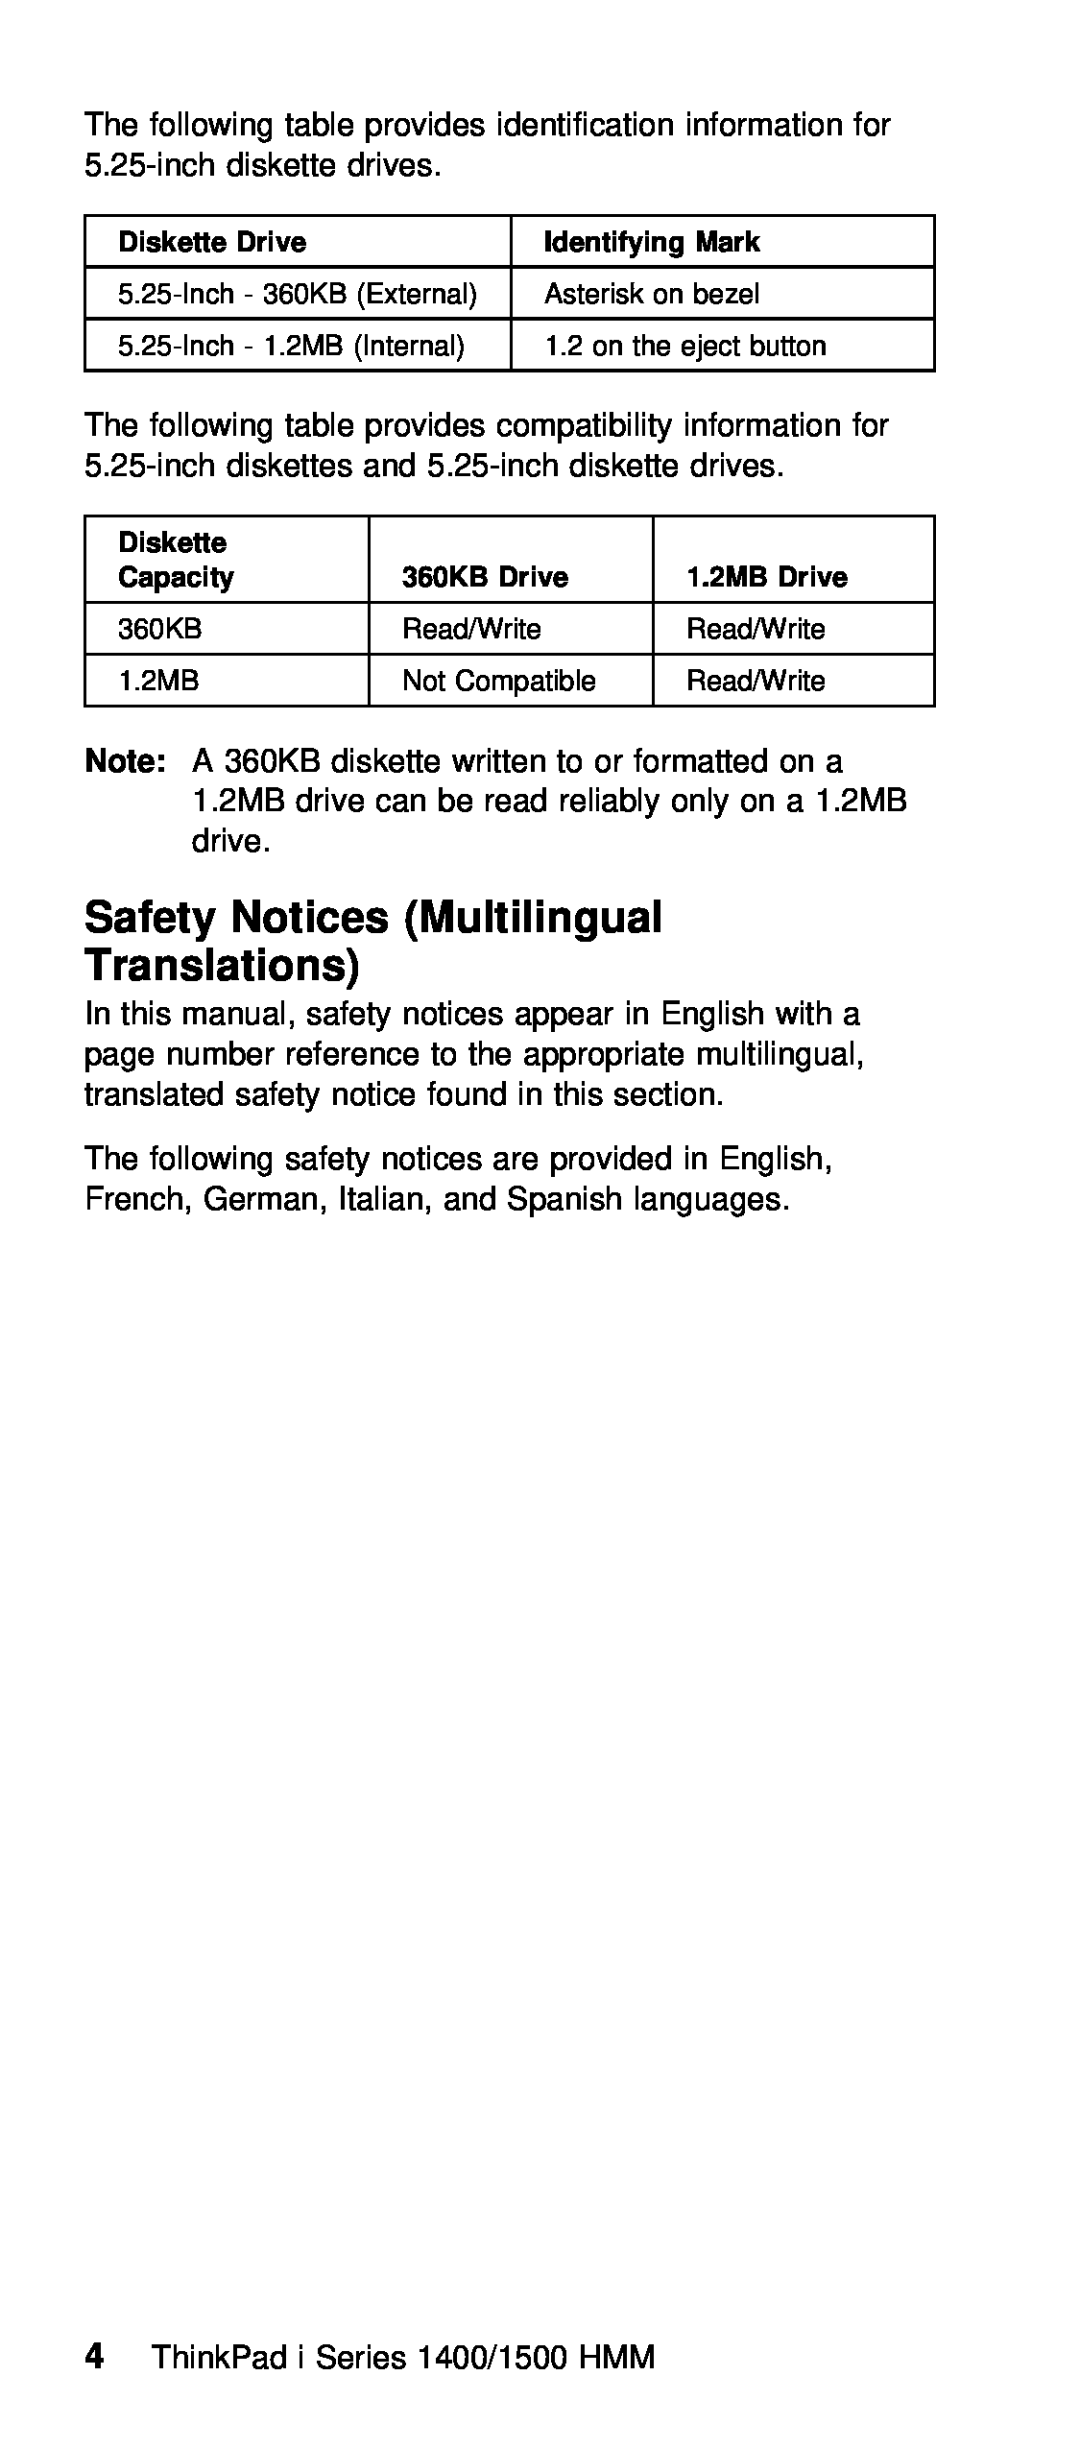 IBM Series 1500, Series 1400 manual Safety Notices Multilingual Translations 